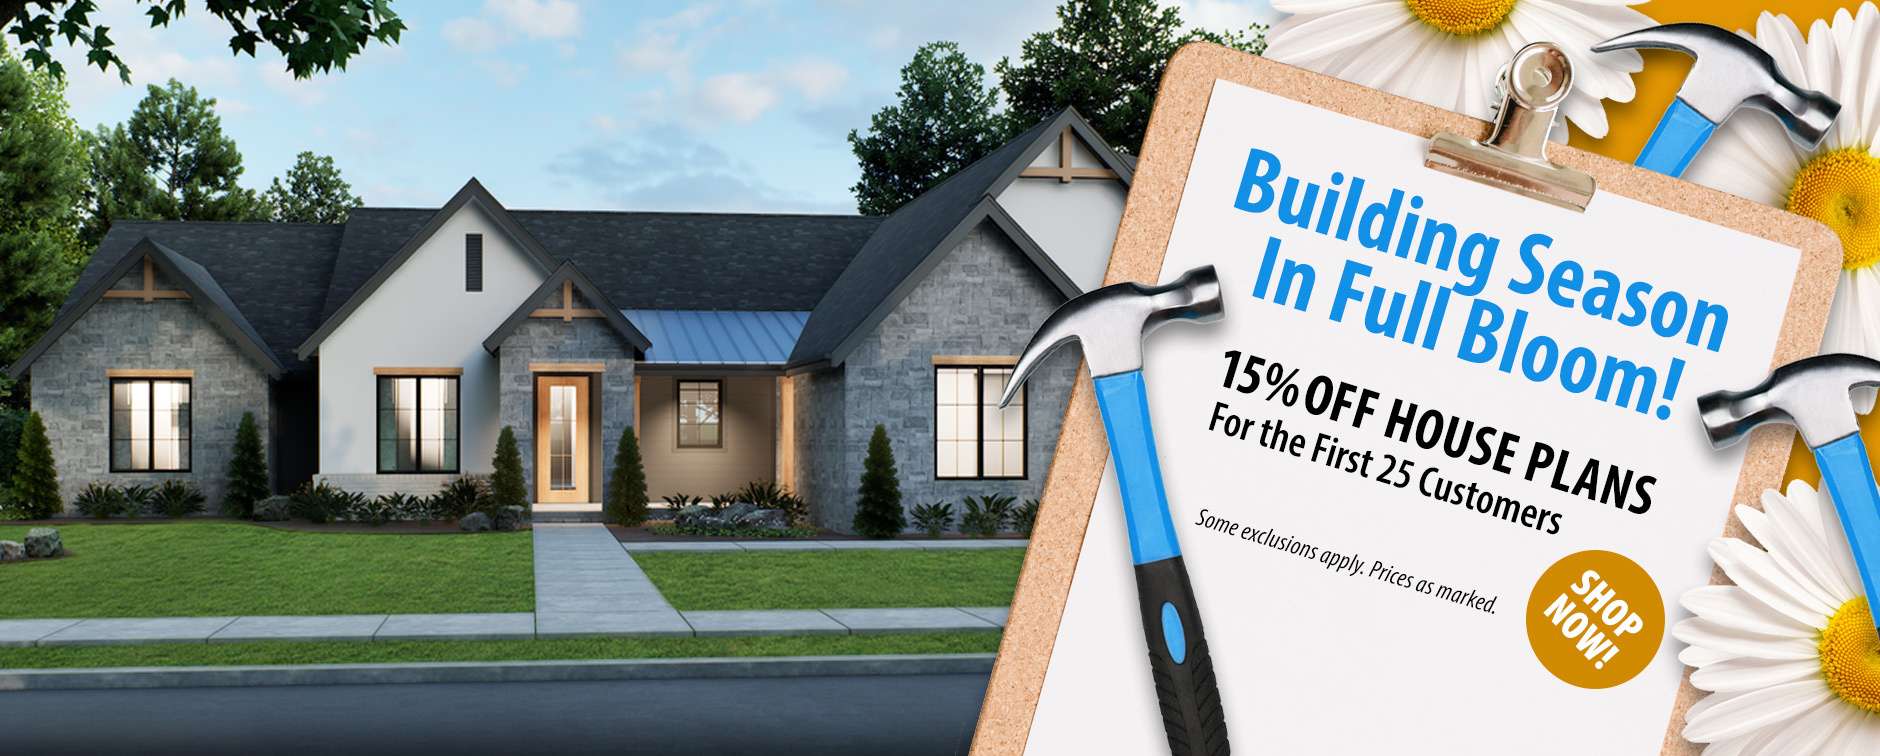 Shop the Spring Planning Event and Get 15% Off House Plans - First 25 Customers